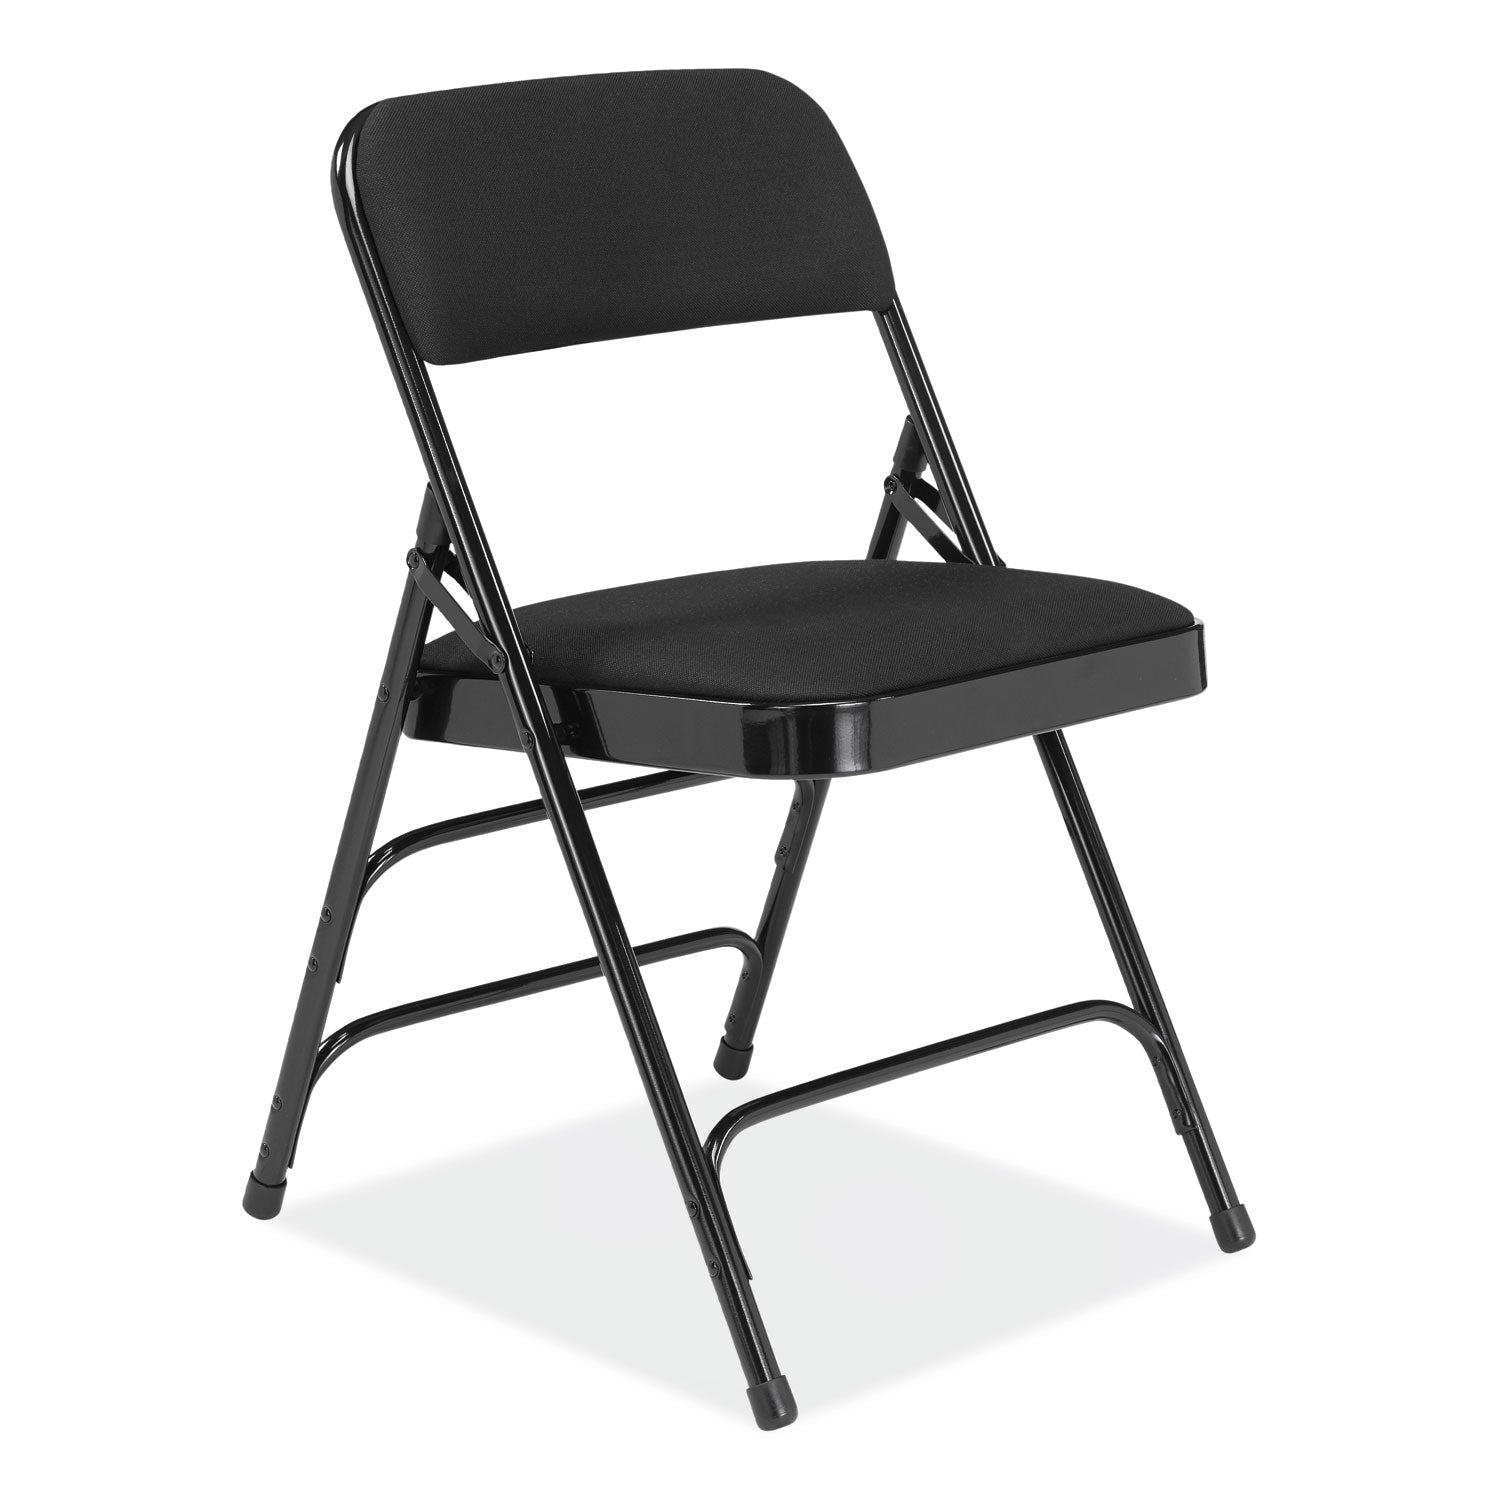 2300-series-fabric-upholstered-triple-brace-premium-folding-chair-supports-500lb-midnight-black-4-ctships-in-1-3-bus-days_nps2310 - 2